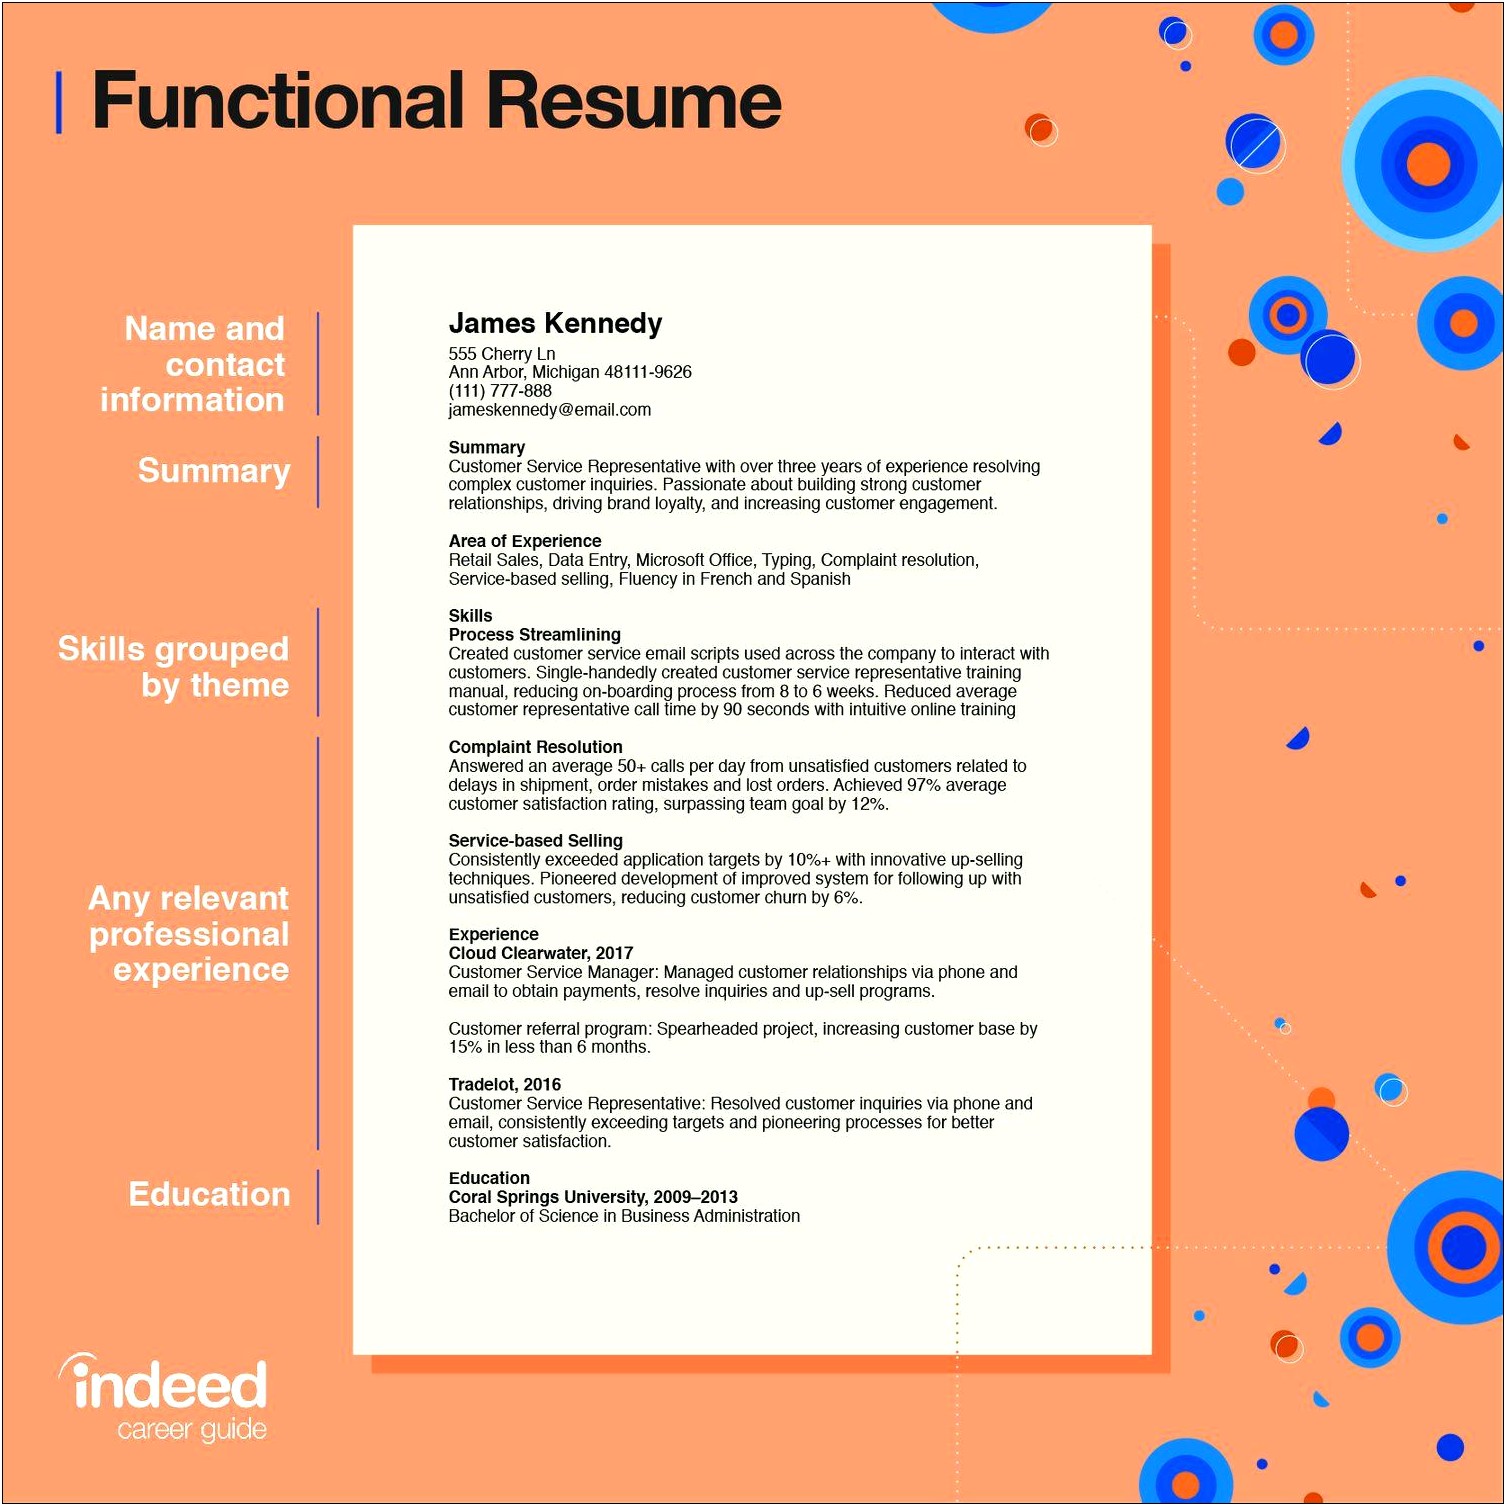 Resume Jobs Oldest To Newest